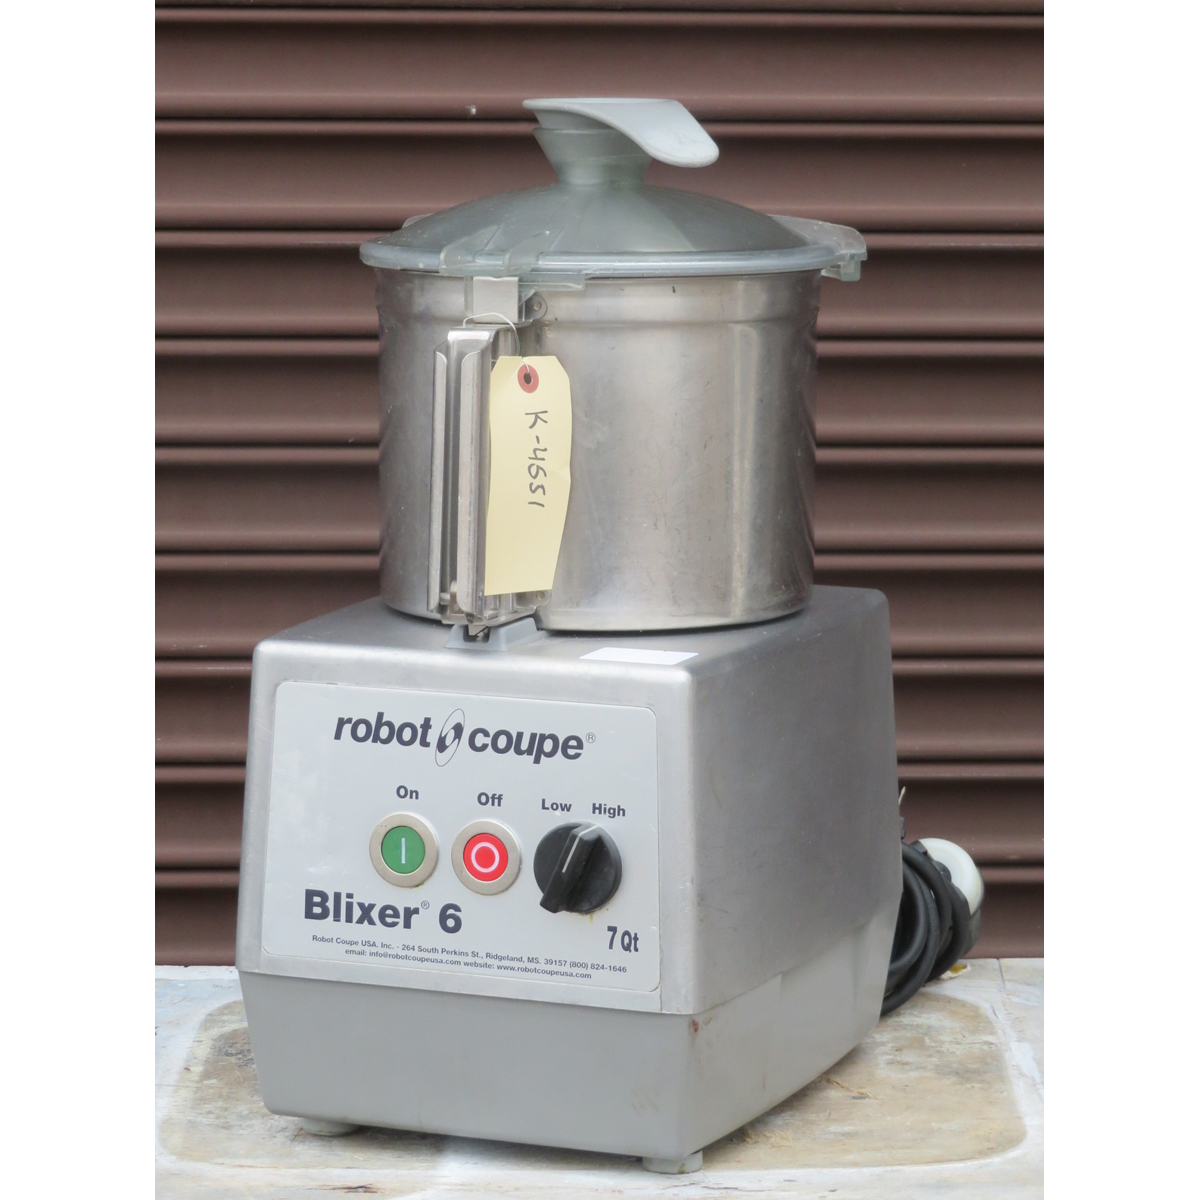 Robot Coupe BLIXER-6 Food Processor, Used Great Condition